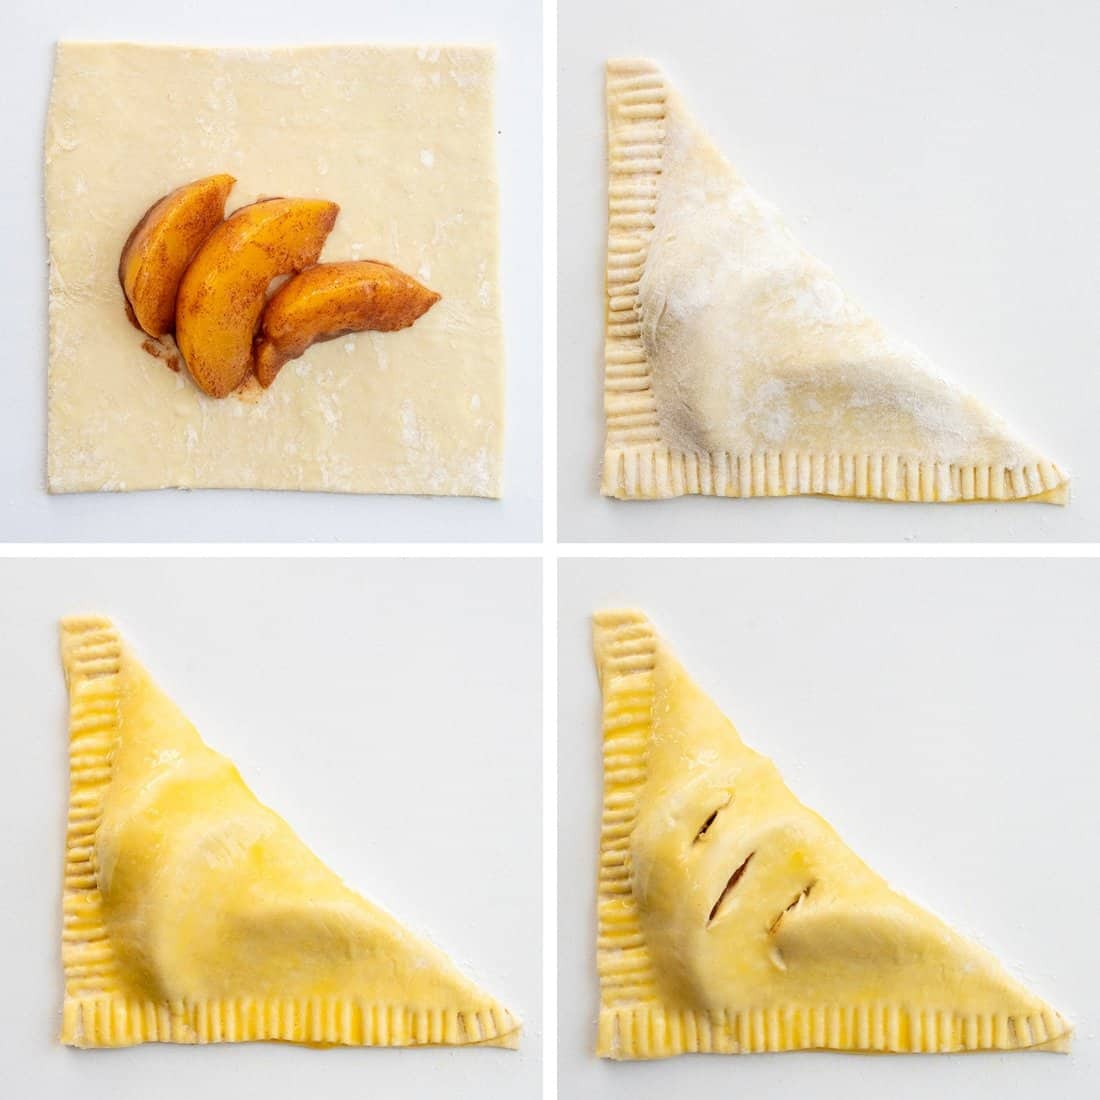 Steps for Filling Puff Pastry with Peaches, Folding, Brushing with Egg Wash, and Piercing to Make Peach Turnovers.